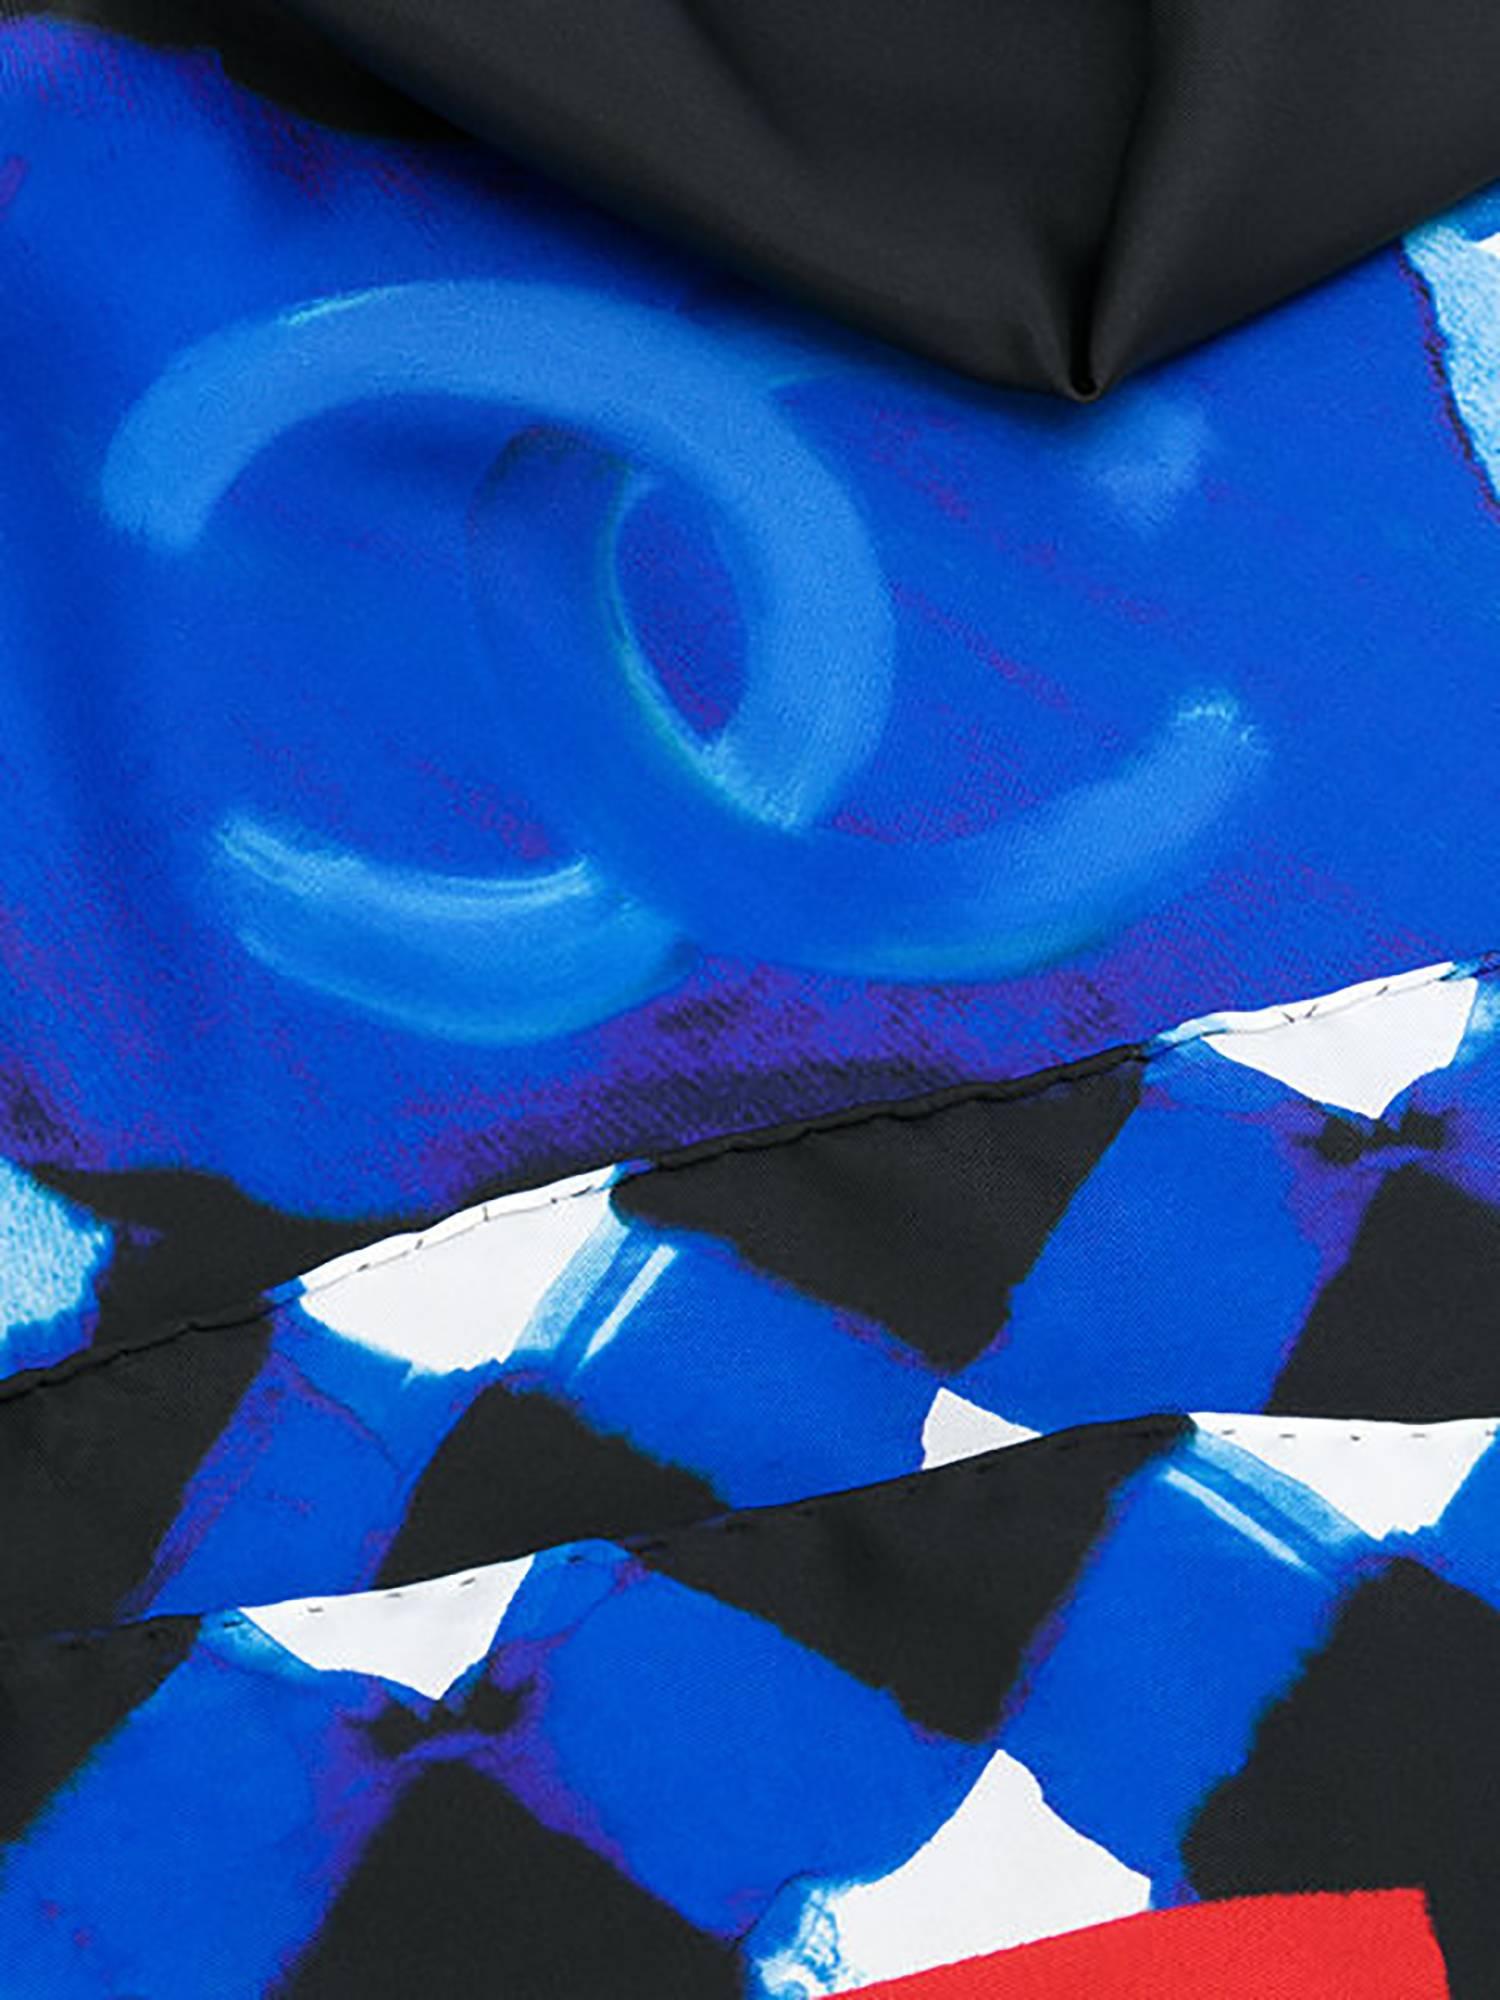 Electric blue silk abstract print scarf from Chanel Vintage featuring a printed logo. Please note that vintage items are not new and therefore might have minor imperfections.

Made in Italy